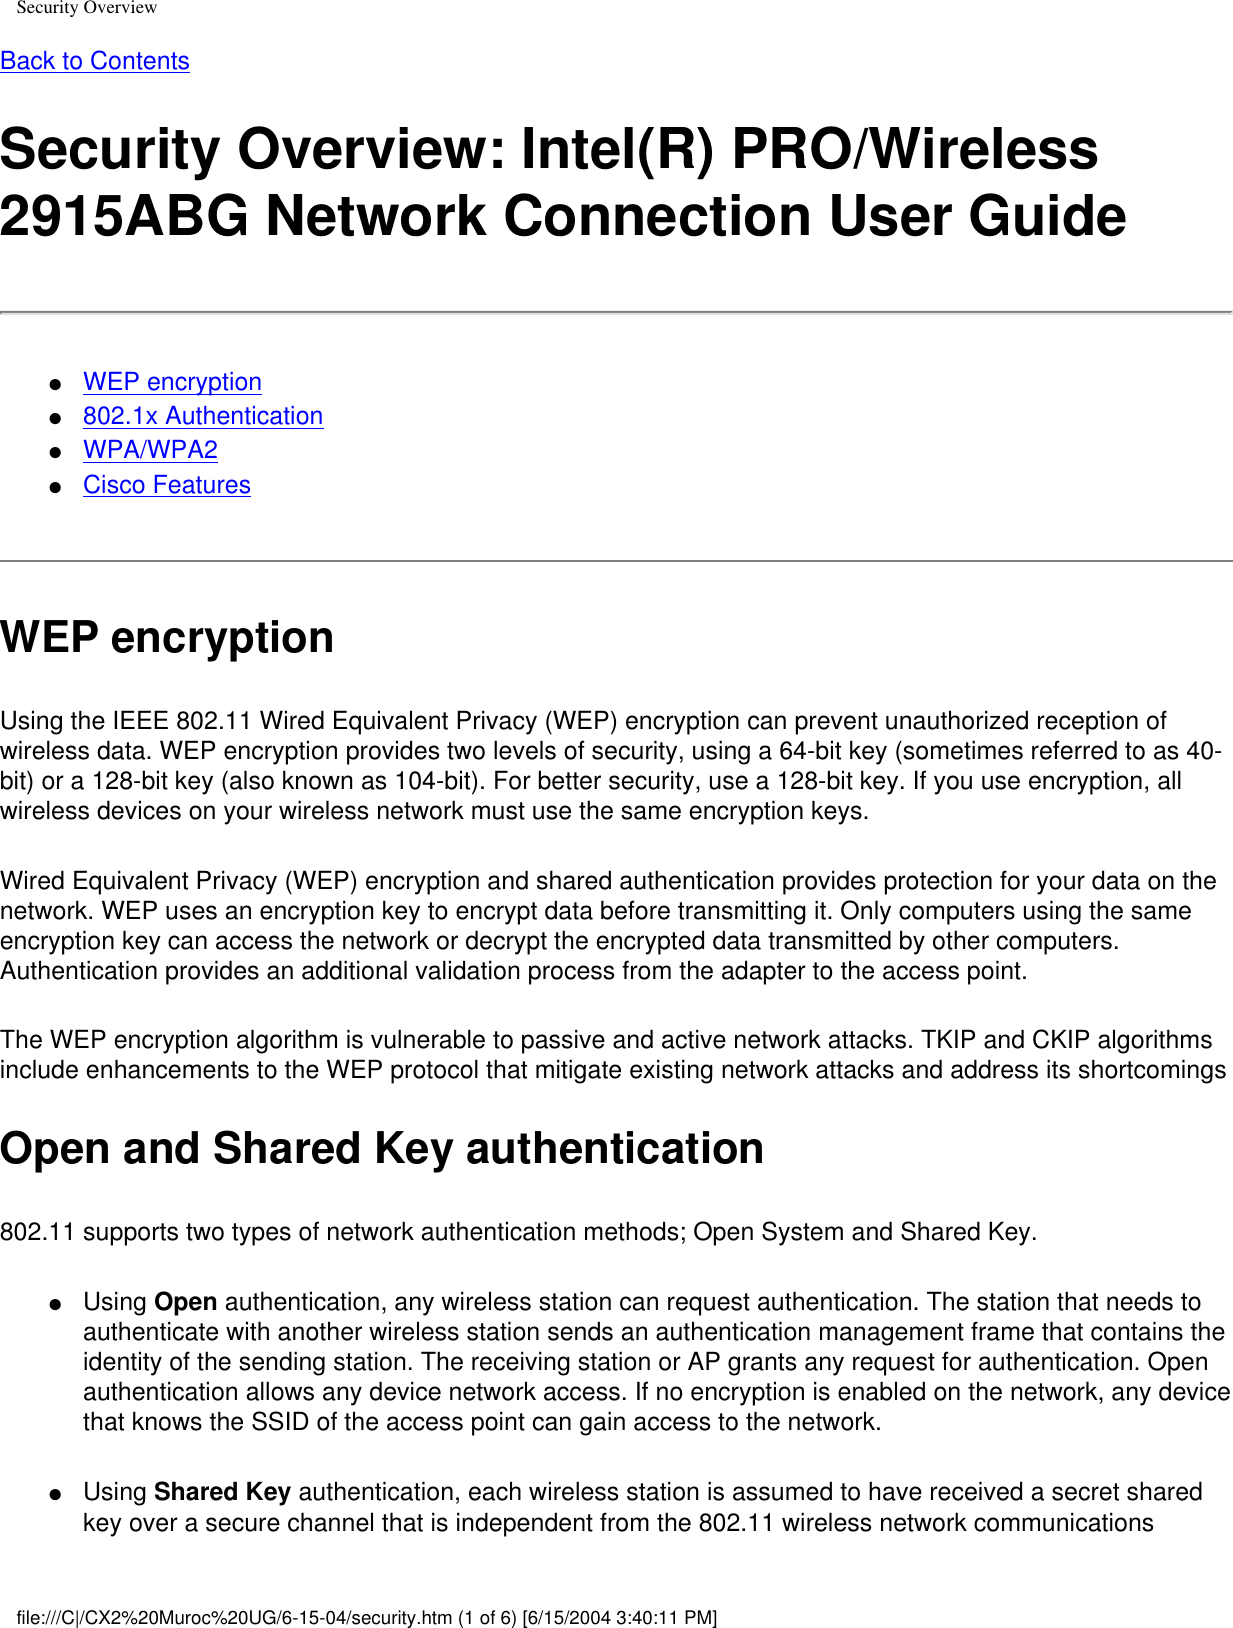 Security OverviewBack to Contents Security Overview: Intel(R) PRO/Wireless 2915ABG Network Connection User Guide●     WEP encryption●     802.1x Authentication ●     WPA/WPA2●     Cisco Features WEP encryptionUsing the IEEE 802.11 Wired Equivalent Privacy (WEP) encryption can prevent unauthorized reception of wireless data. WEP encryption provides two levels of security, using a 64-bit key (sometimes referred to as 40-bit) or a 128-bit key (also known as 104-bit). For better security, use a 128-bit key. If you use encryption, all wireless devices on your wireless network must use the same encryption keys.Wired Equivalent Privacy (WEP) encryption and shared authentication provides protection for your data on the network. WEP uses an encryption key to encrypt data before transmitting it. Only computers using the same encryption key can access the network or decrypt the encrypted data transmitted by other computers. Authentication provides an additional validation process from the adapter to the access point.The WEP encryption algorithm is vulnerable to passive and active network attacks. TKIP and CKIP algorithms include enhancements to the WEP protocol that mitigate existing network attacks and address its shortcomingsOpen and Shared Key authentication802.11 supports two types of network authentication methods; Open System and Shared Key.●     Using Open authentication, any wireless station can request authentication. The station that needs to authenticate with another wireless station sends an authentication management frame that contains the identity of the sending station. The receiving station or AP grants any request for authentication. Open authentication allows any device network access. If no encryption is enabled on the network, any device that knows the SSID of the access point can gain access to the network. ●     Using Shared Key authentication, each wireless station is assumed to have received a secret shared key over a secure channel that is independent from the 802.11 wireless network communications file:///C|/CX2%20Muroc%20UG/6-15-04/security.htm (1 of 6) [6/15/2004 3:40:11 PM]